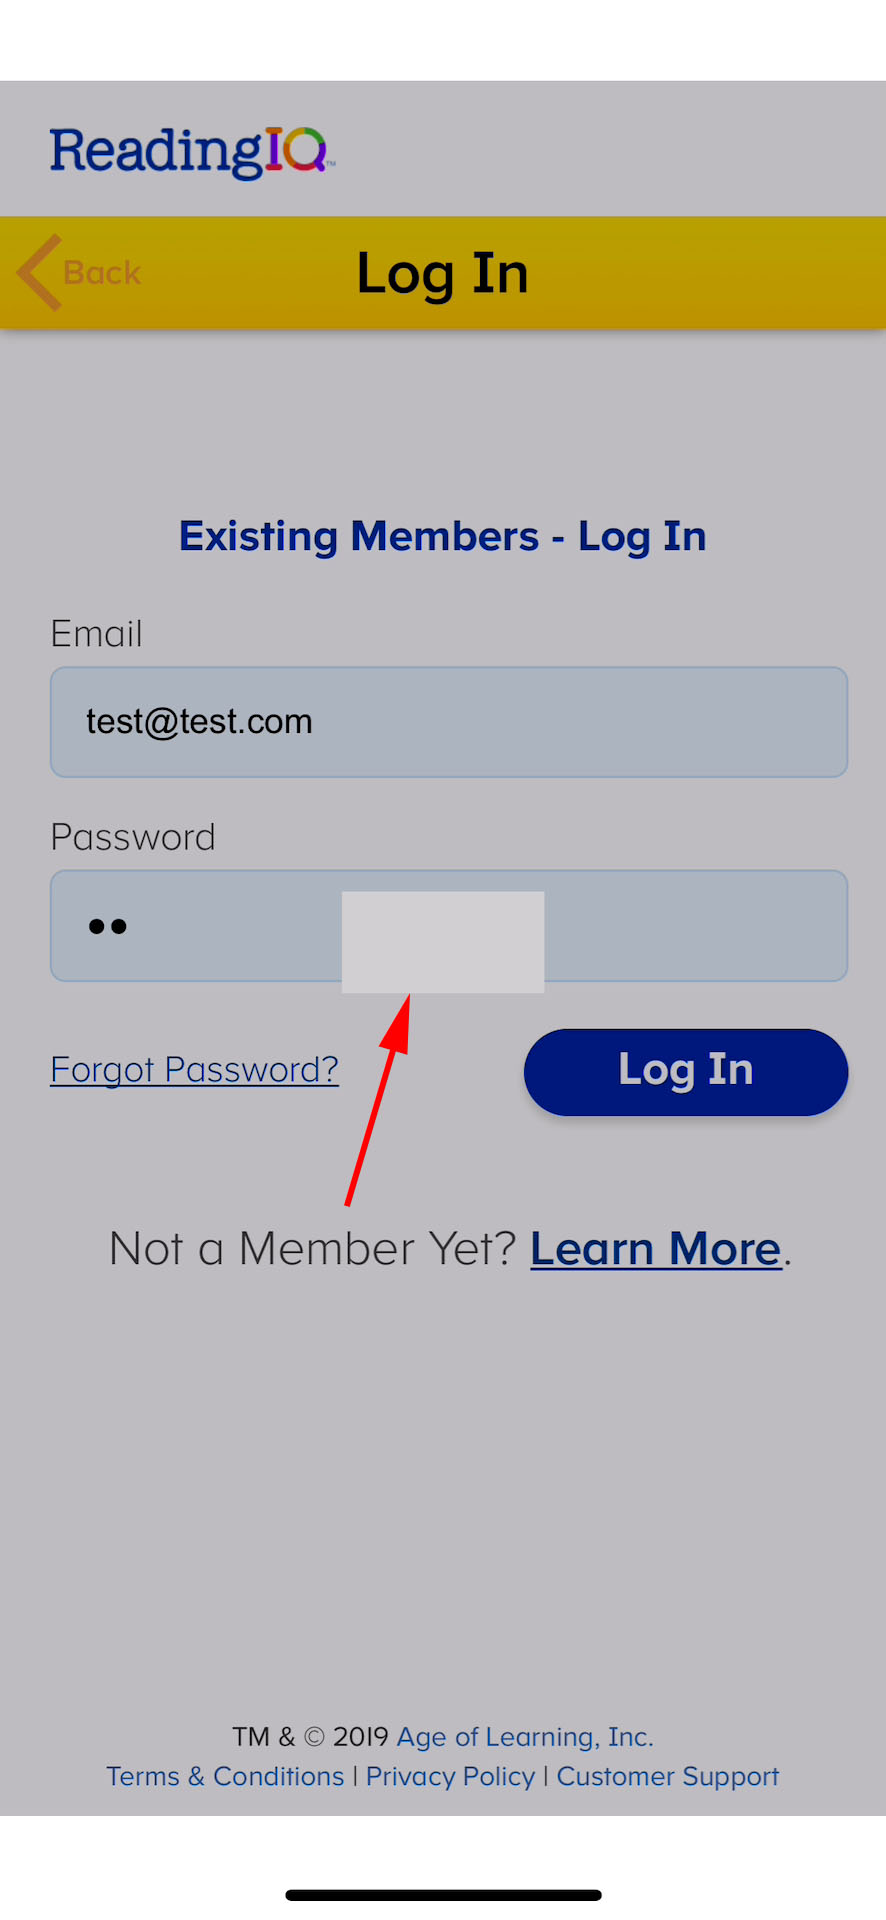 The spinner is not displayed on the ‘Log In’ screen after taping the ‘Log In’ button.